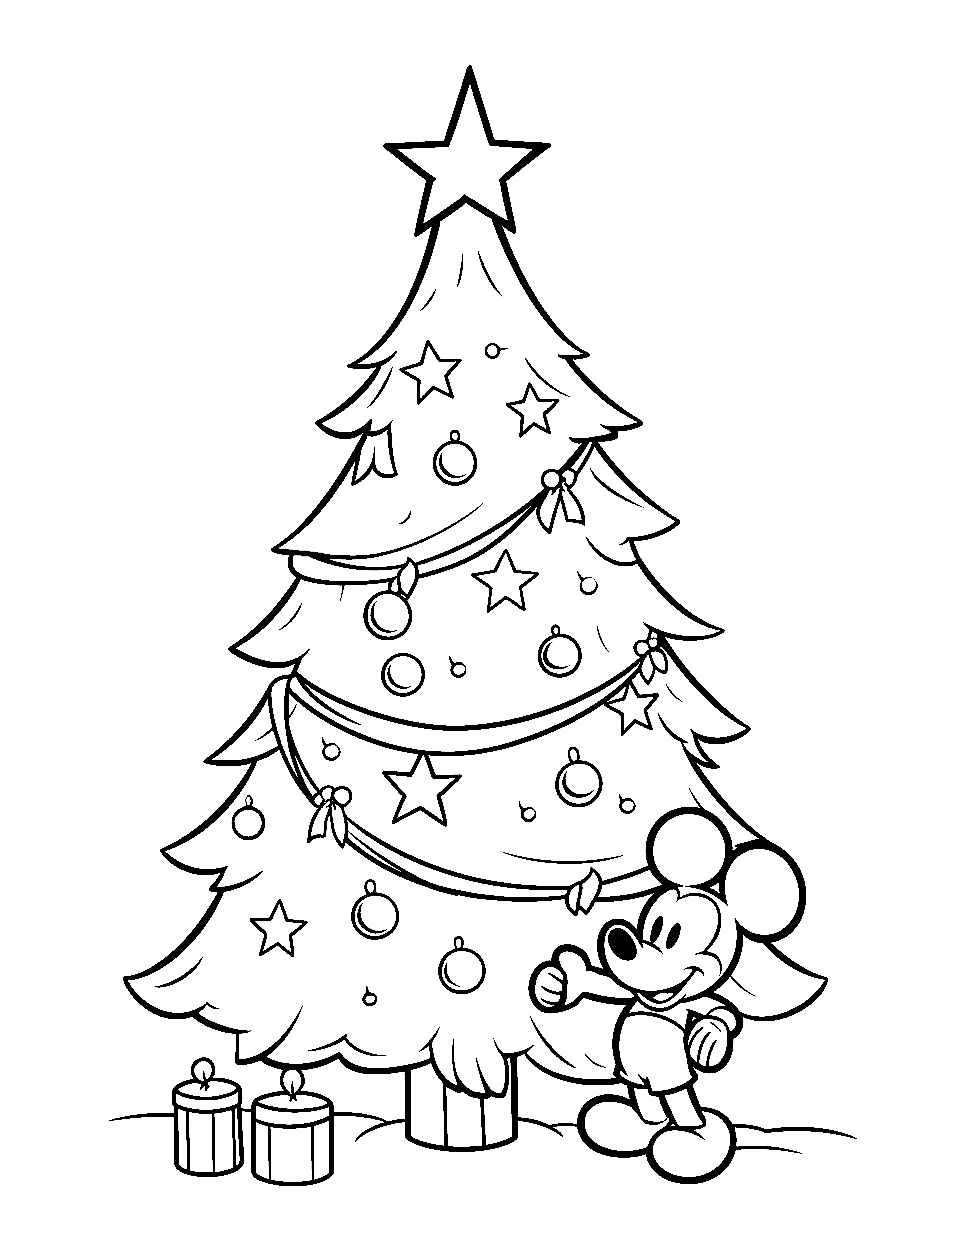 Mickey Mouse’s Christmas Tree Coloring Page - Mickey Mouse decorating a Christmas tree showing thumbs up.